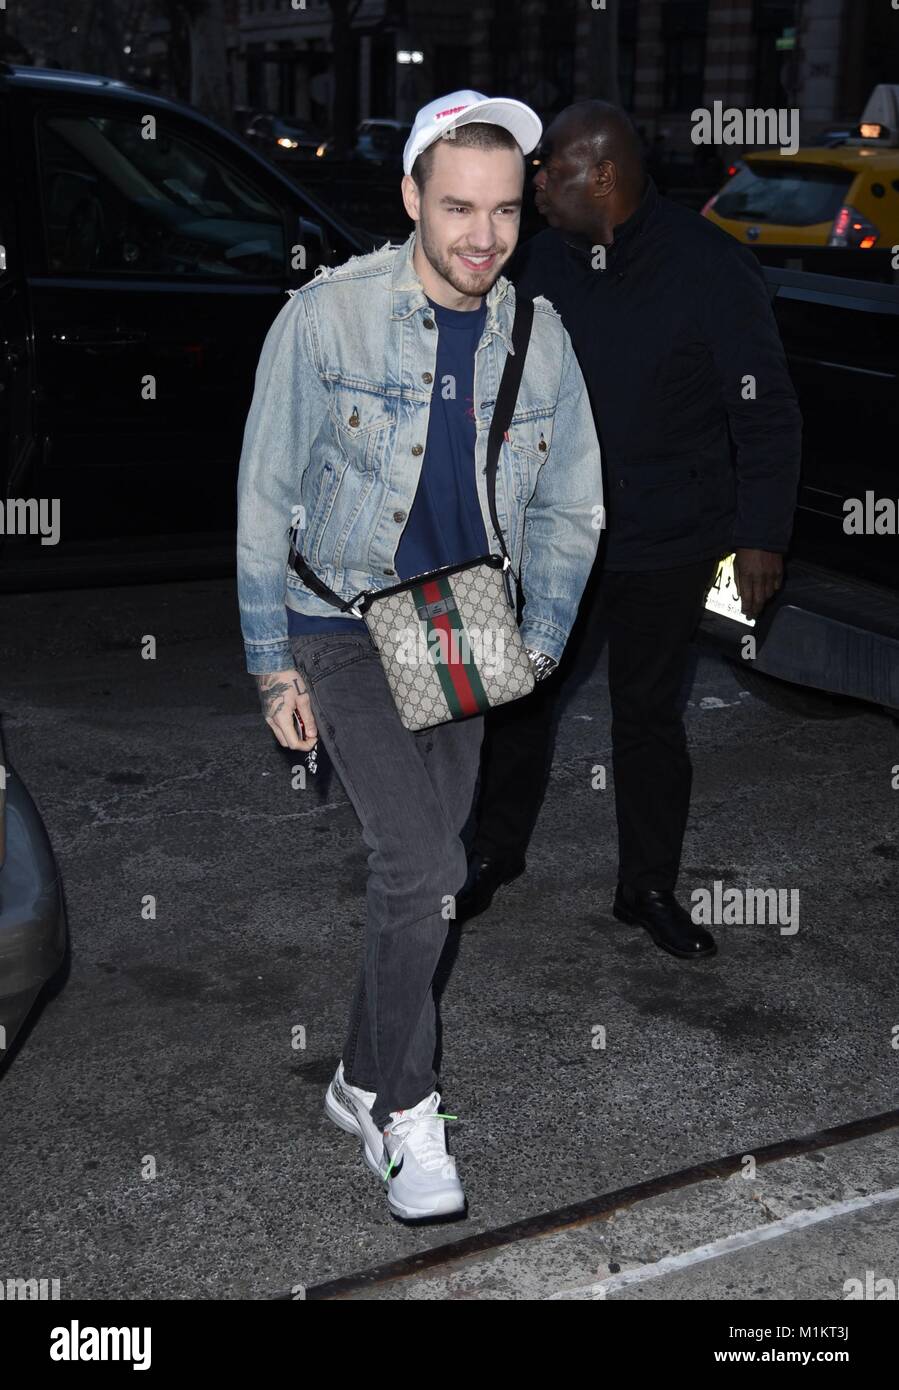 New York, NY, USA. 31st Jan, 2018. Liam Payne, seen at Z-100 studios for Elvis Duran and the Morning Show. He is wearing Off-White X Nike Air Max 97 sneakers. out and about for Celebrity Candids - WED, New York, NY January 31, 2018. Credit: Derek Storm/Everett Collection/Alamy Live News Stock Photo